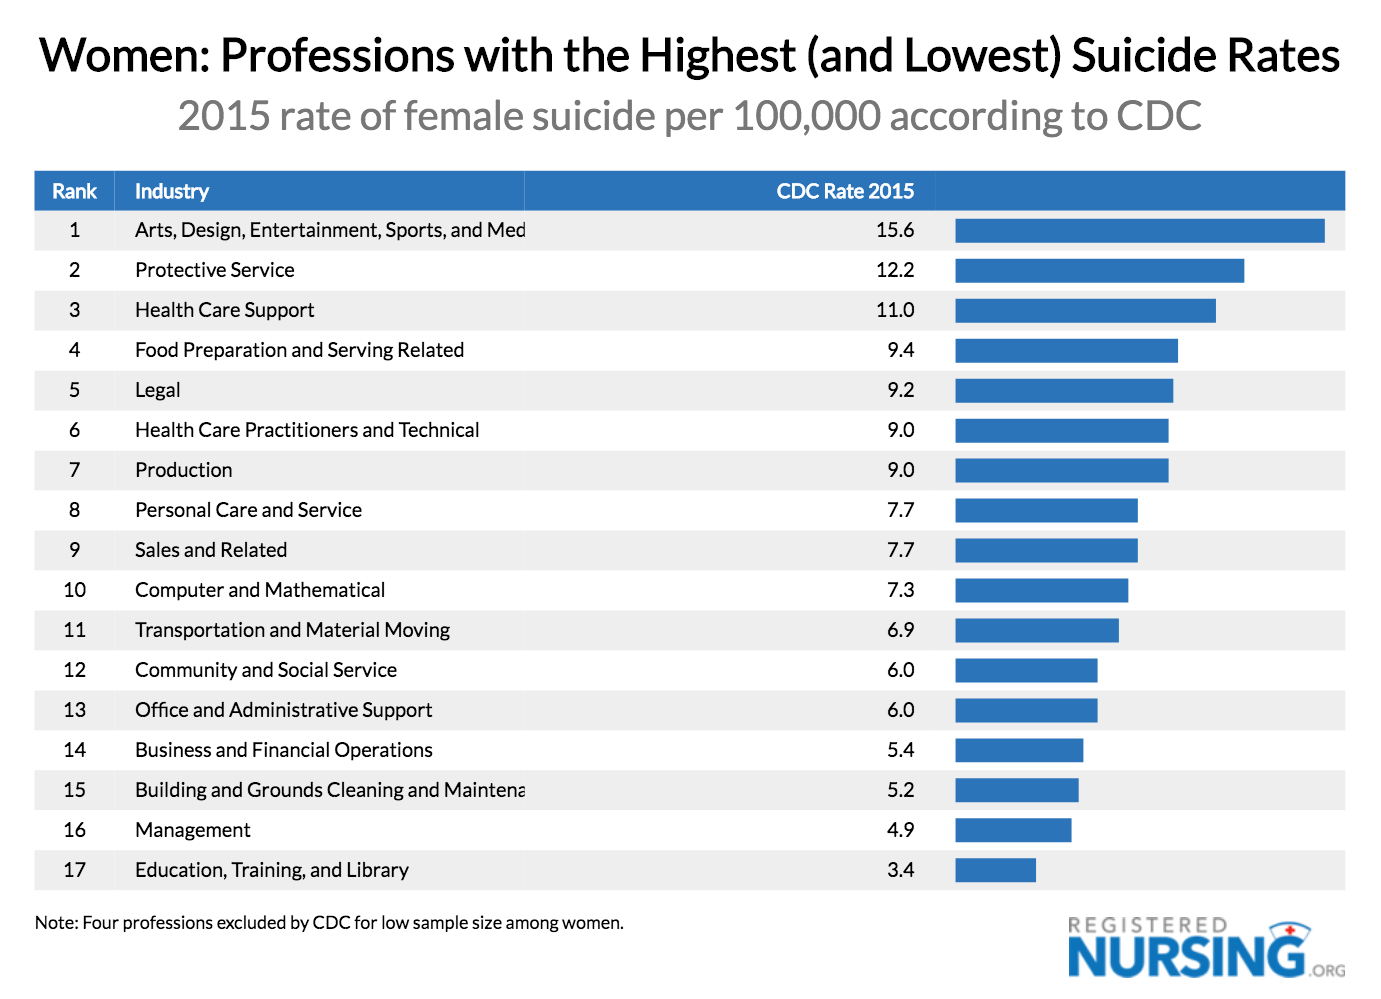 Highest & Lowest Suicide Rates for Women by Profession